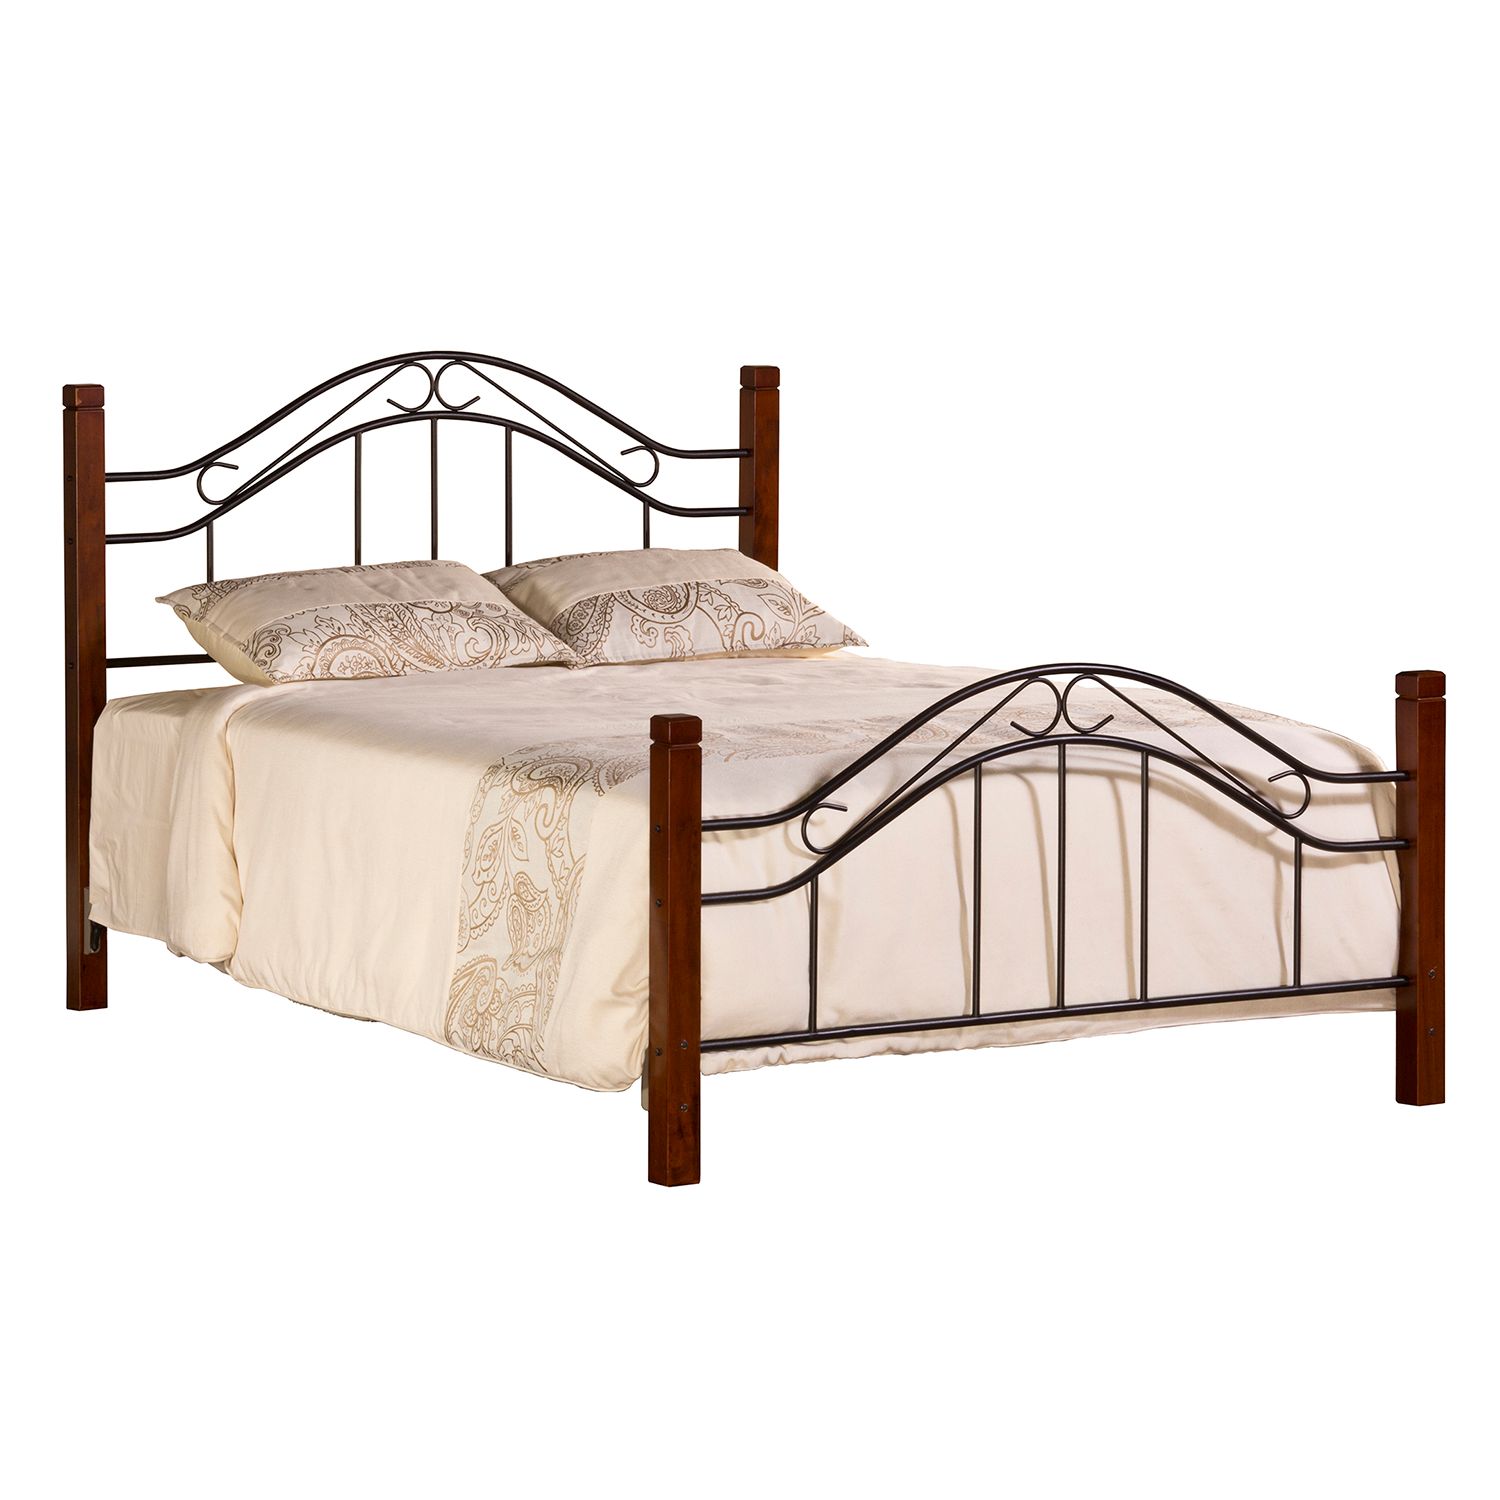 Image for Hillsdale Furniture Matson Twin Bed at Kohl's.